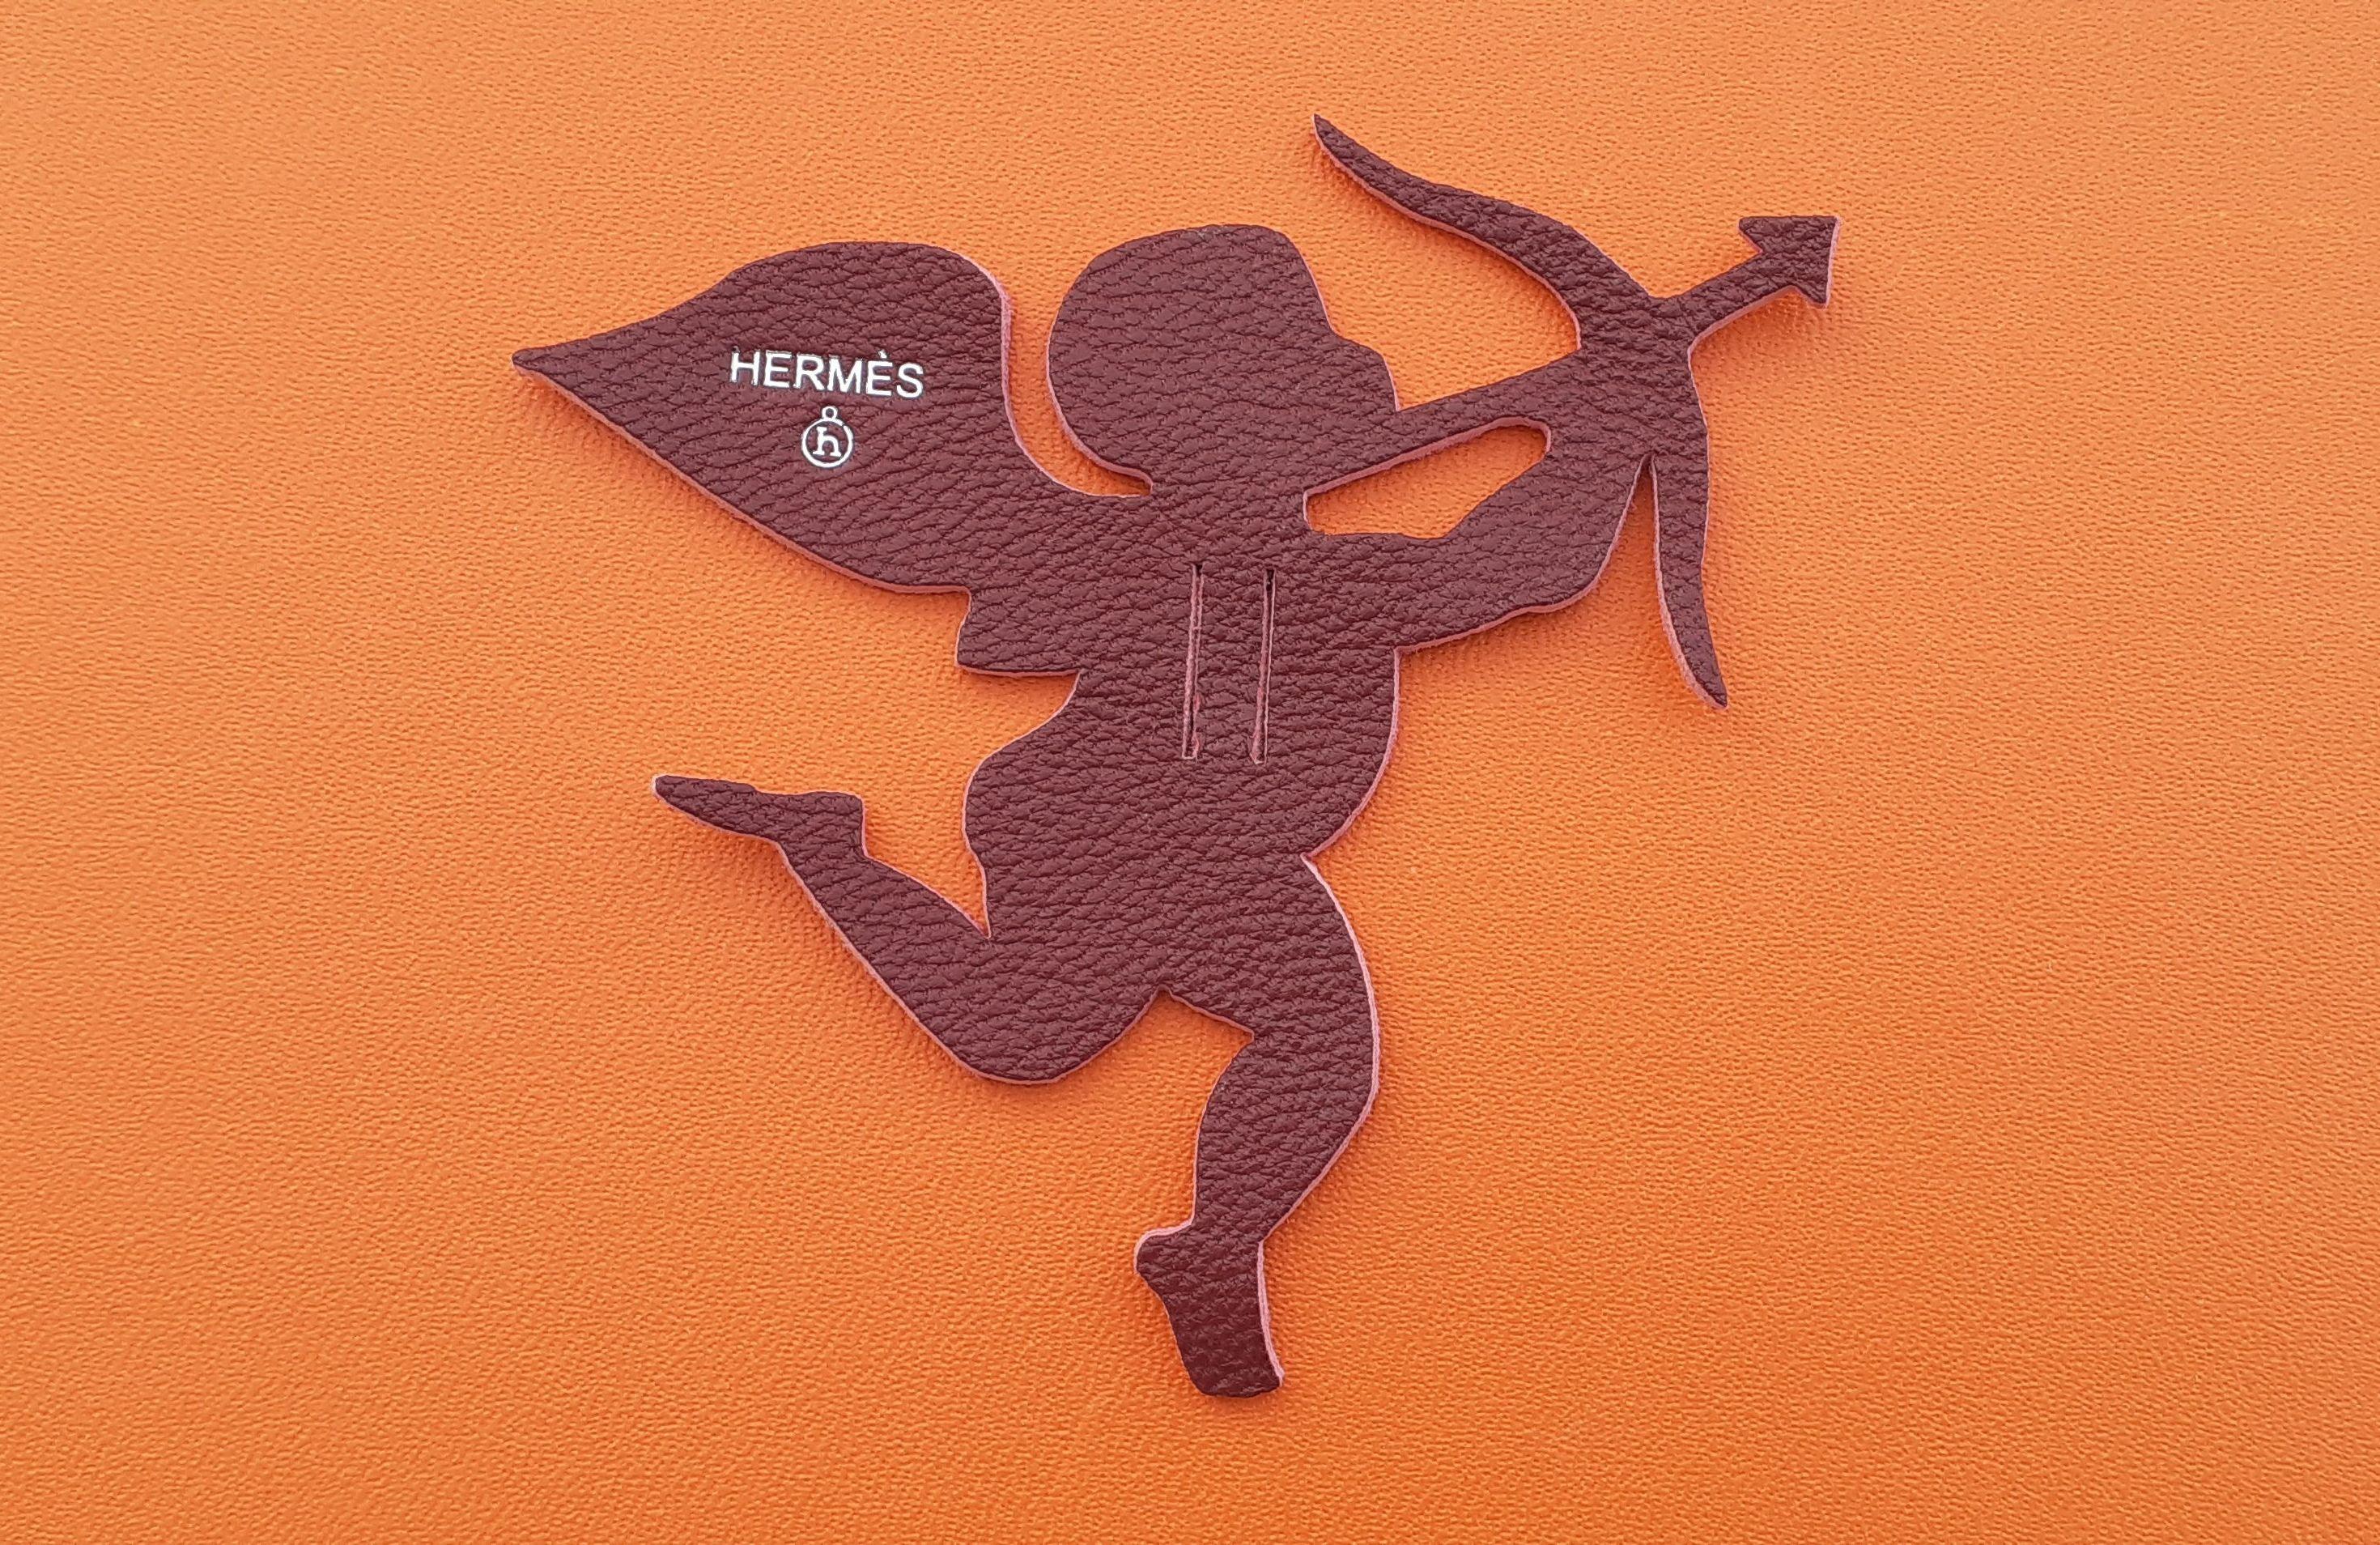 Adorable Authentic Hermès Charm

In shape of Cupid

From the Petit h collection

Made of leather

Colorway: burgundy

This charm adorned the packaging of a small h item, so it has only one side

